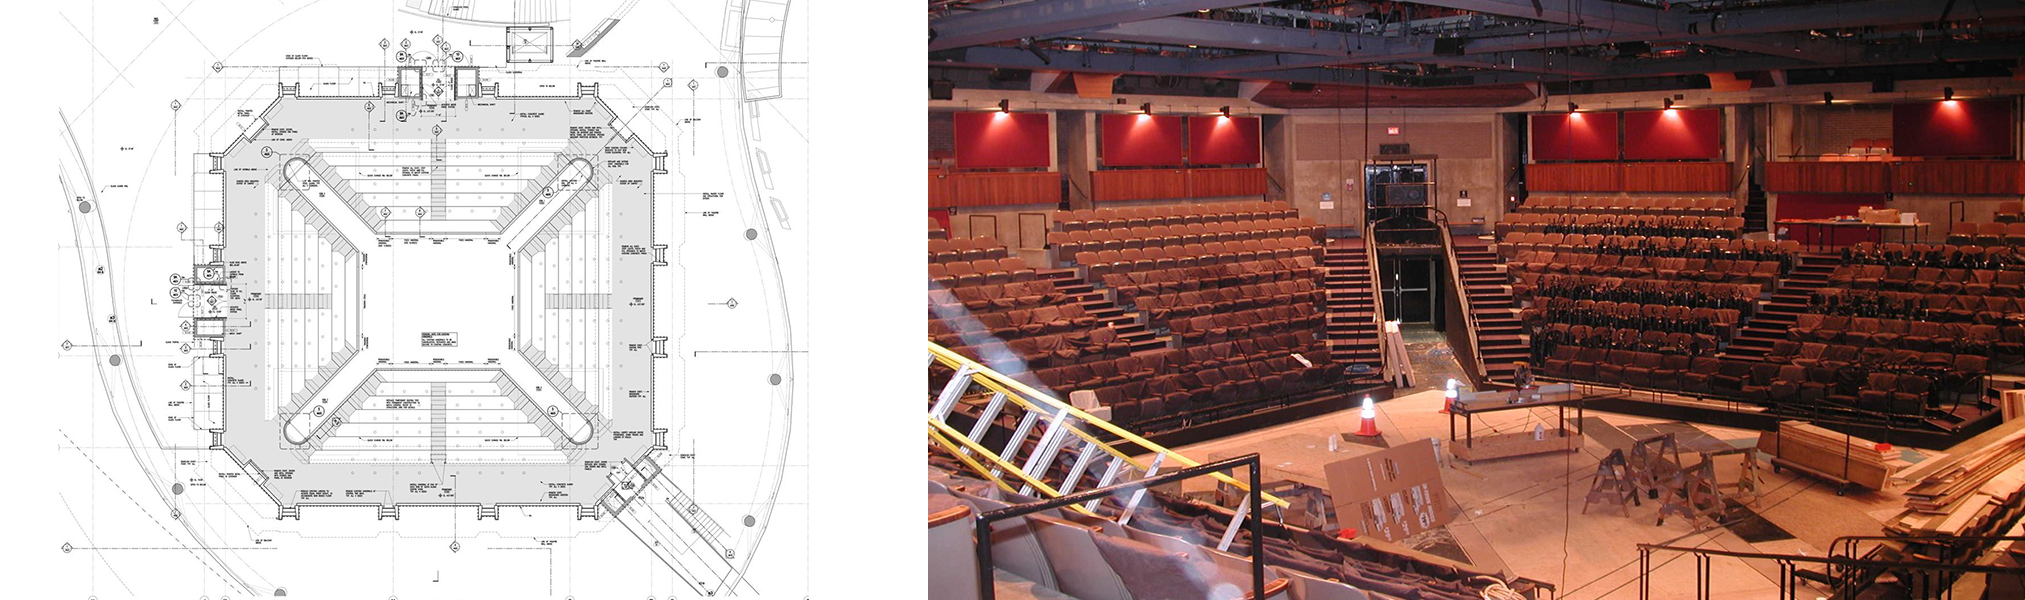 Arena Stage Kreeger Theater Seating Chart